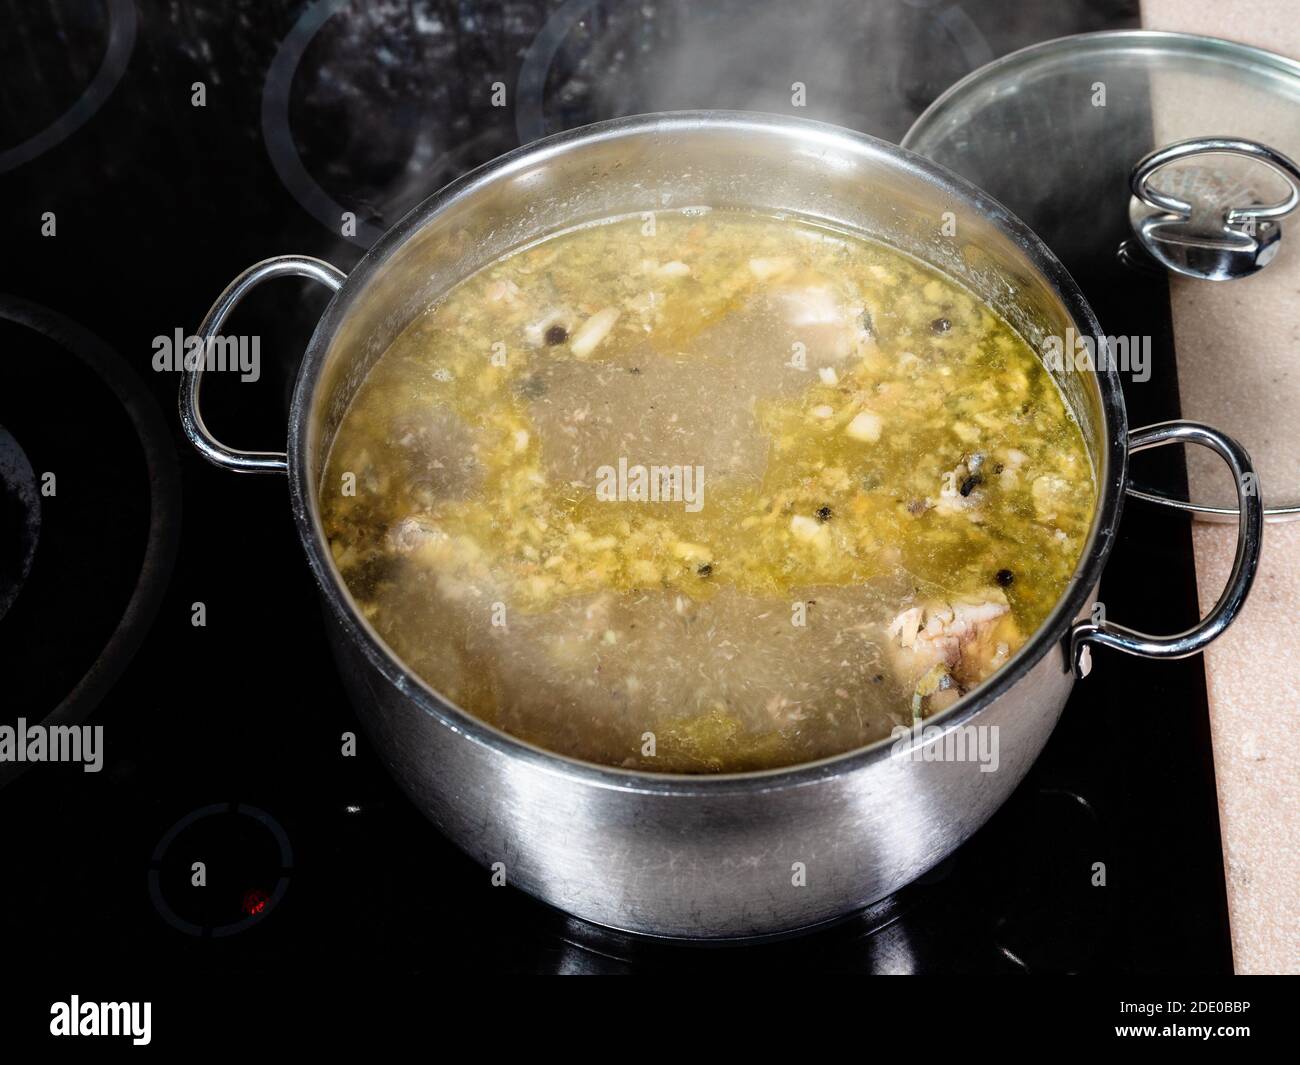 https://c8.alamy.com/comp/2DE0BBP/above-view-of-fish-soup-is-cooked-in-stockpot-on-ceramic-stove-in-home-kitchen-2DE0BBP.jpg